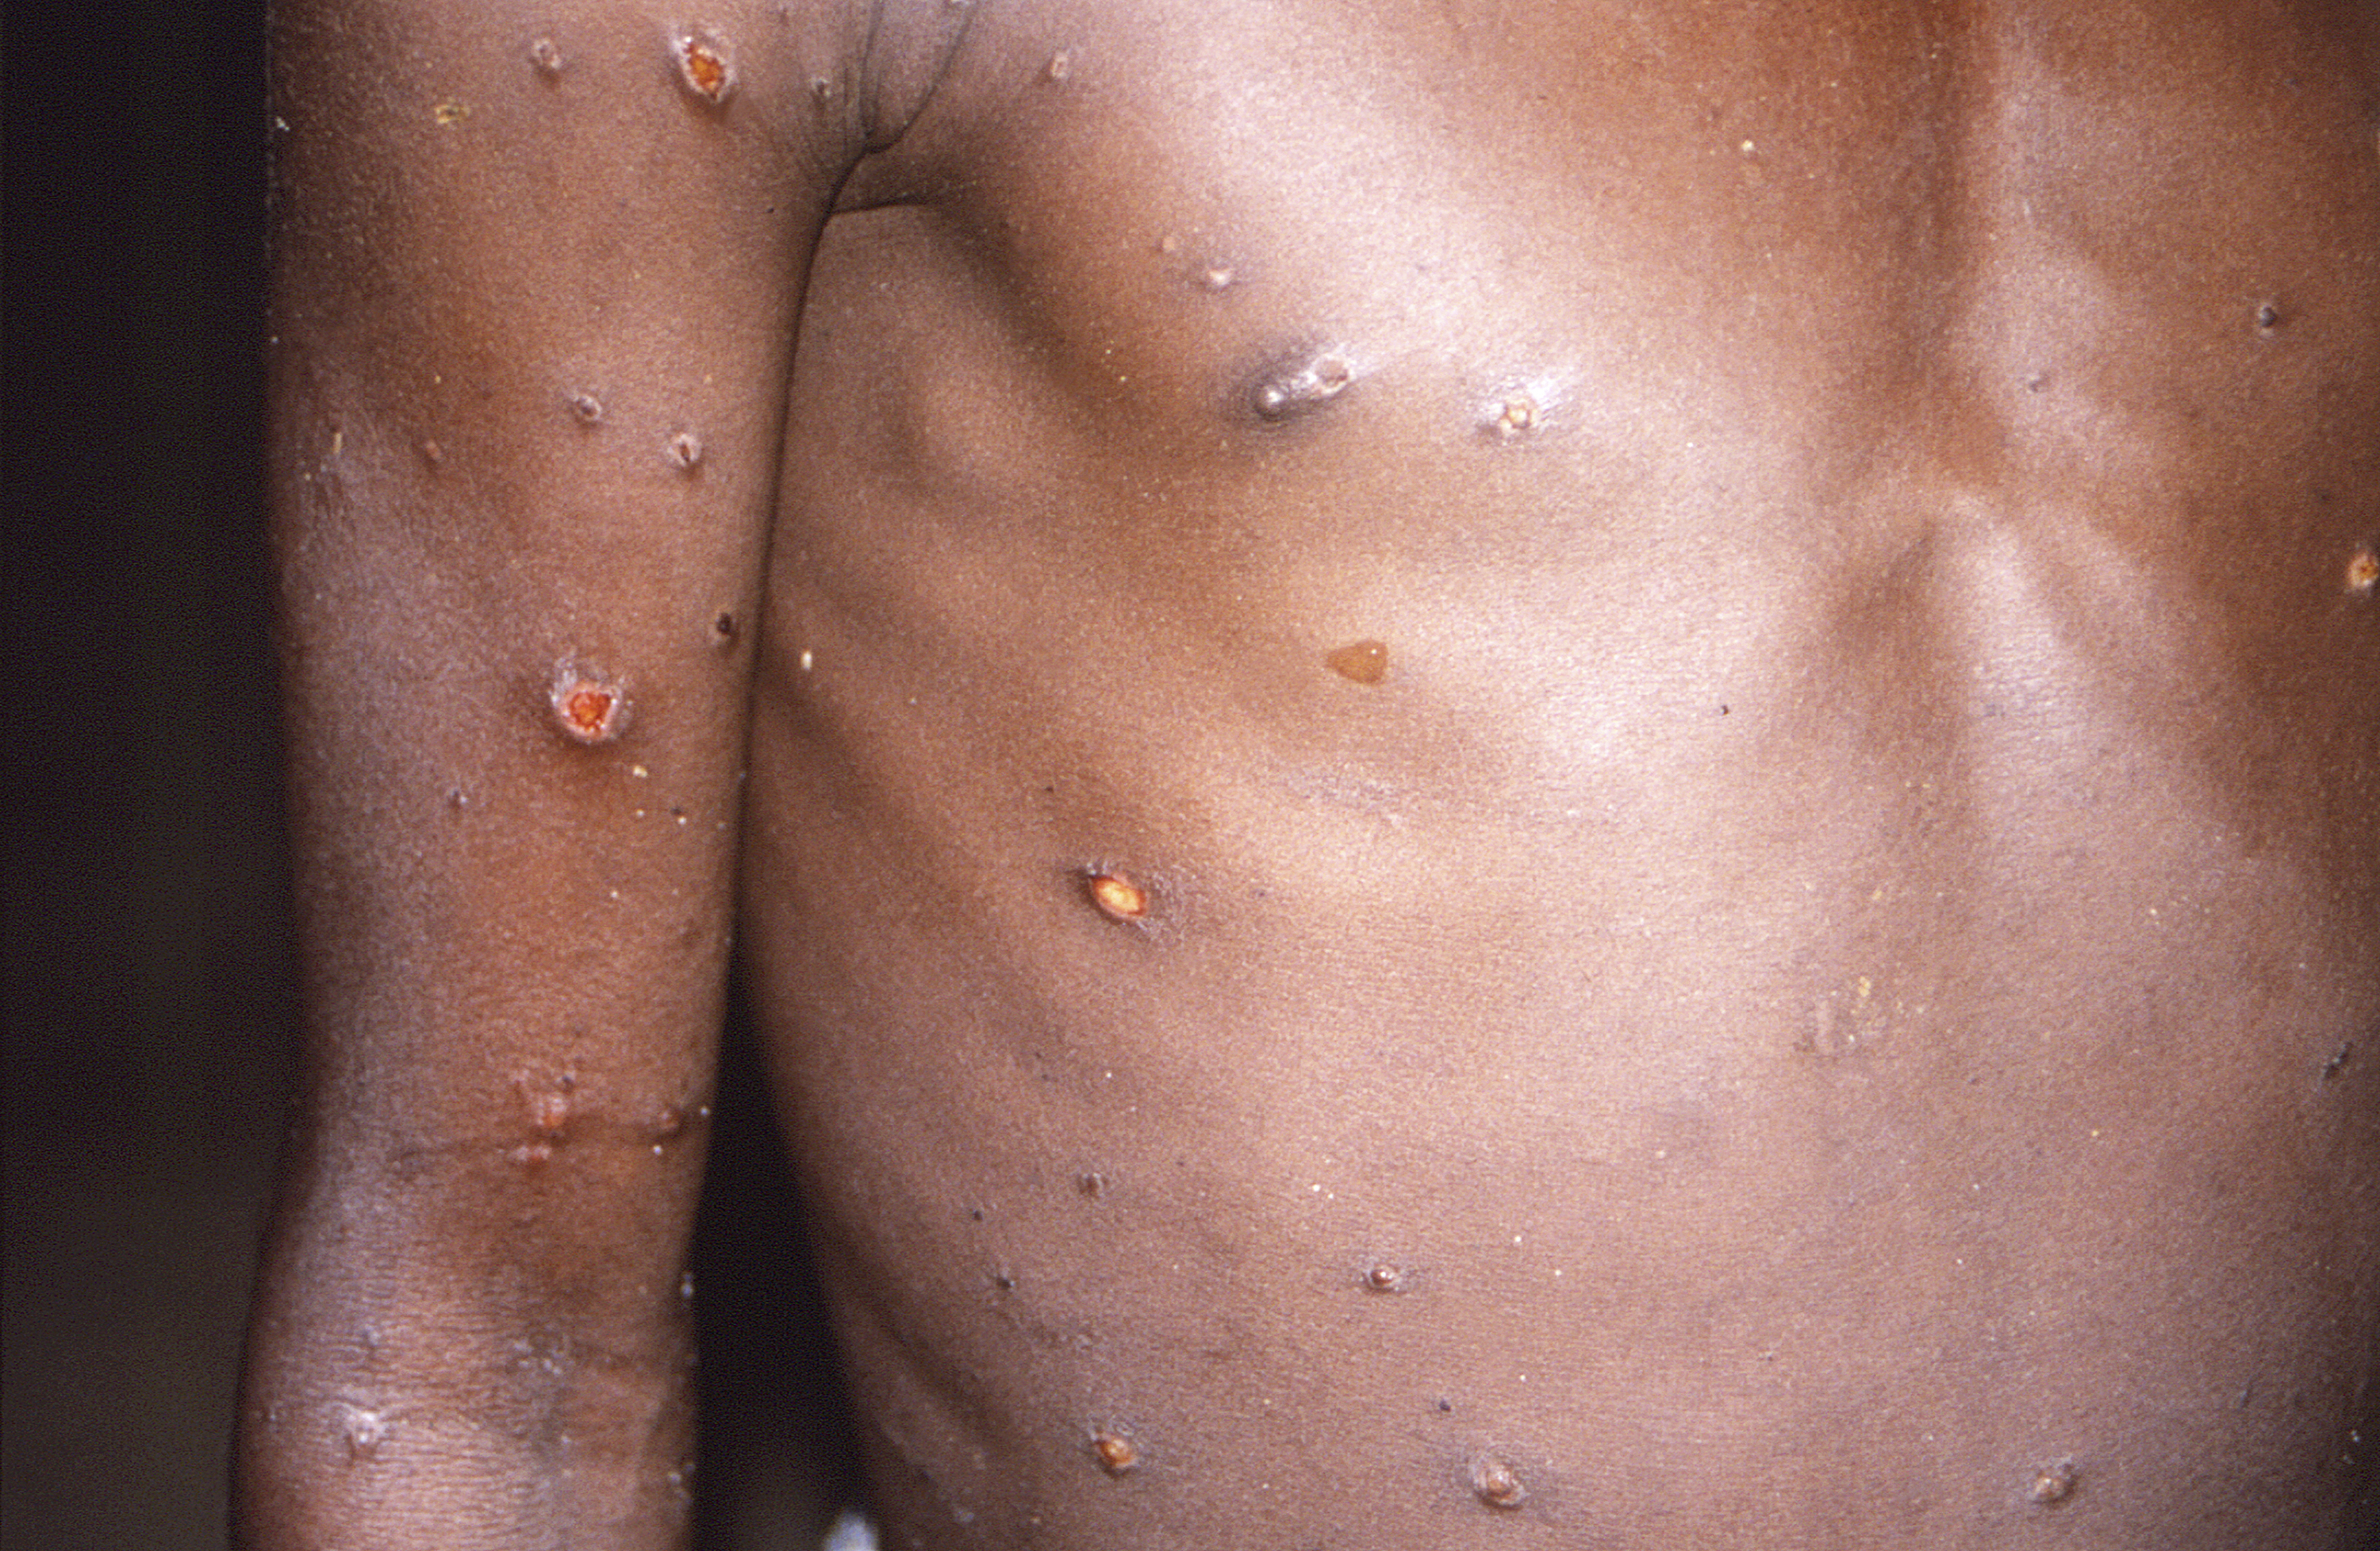 Image of the arm and torso of the patient, whose skin shows monkeypox lesions, in 1997.